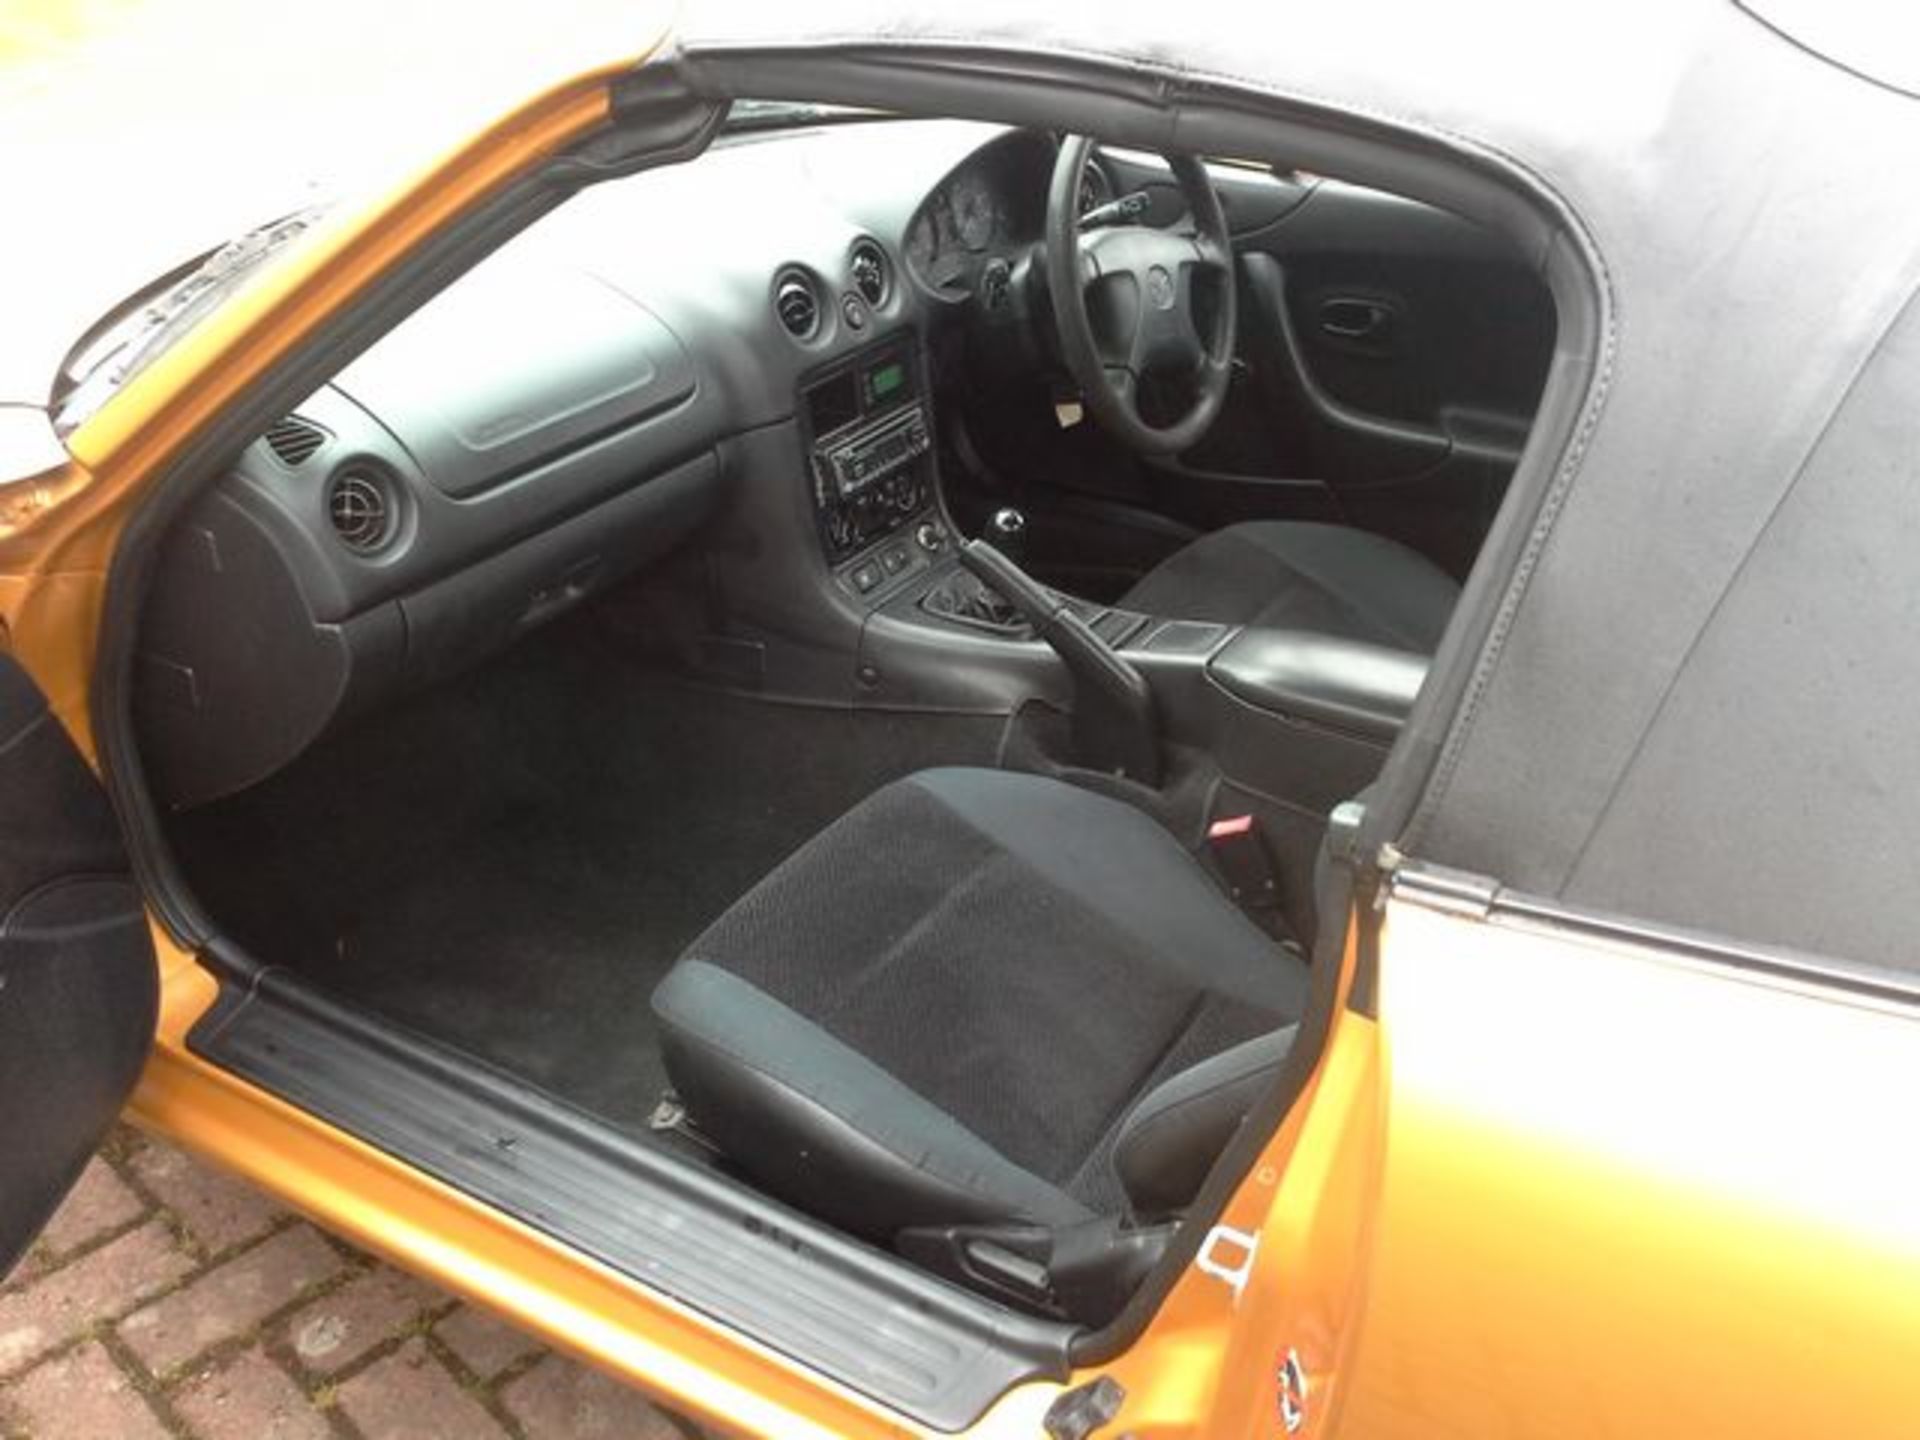 MAZDA, MX-5 - 1598cc, Chassis number JMZNB186200134536 - finding an early production MK II in this - Image 7 of 16